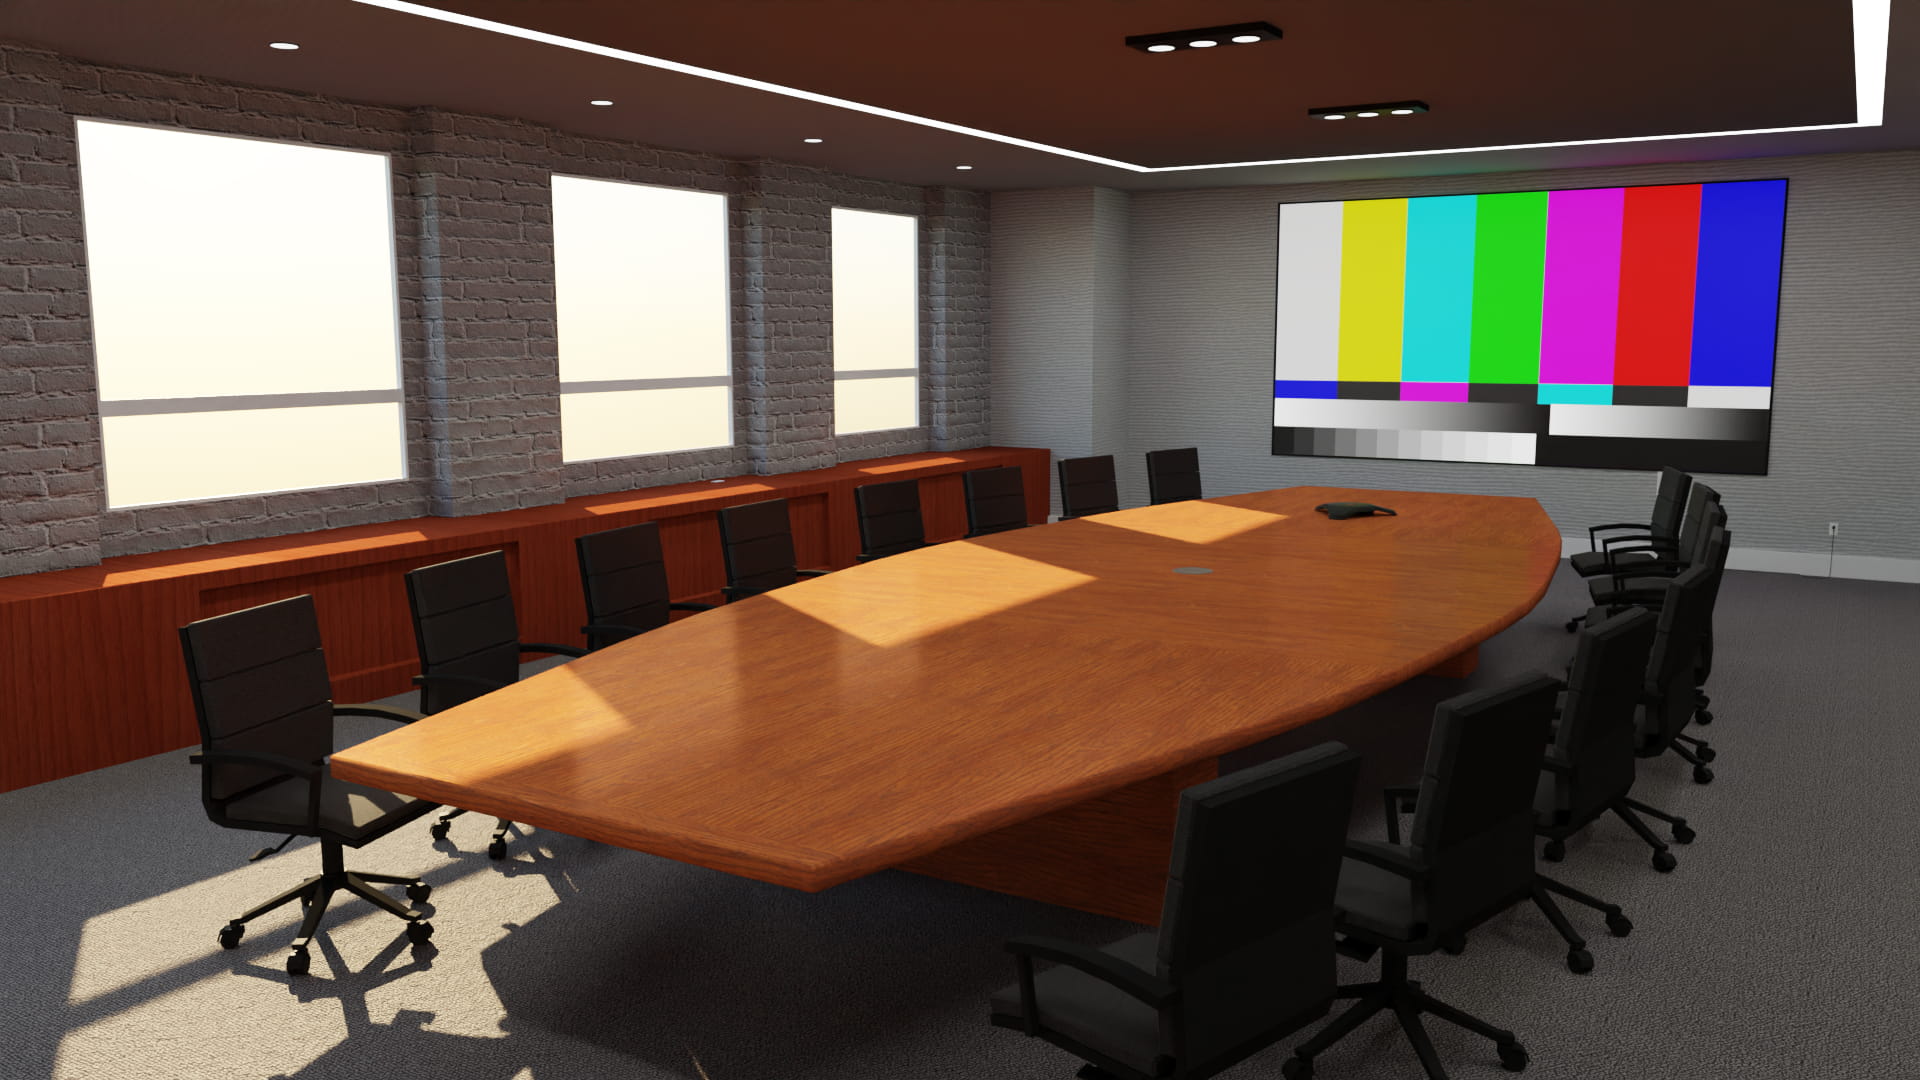 A Hubs virtual conference room with several chairs, large wooden desk, and exposed grey brick walls.